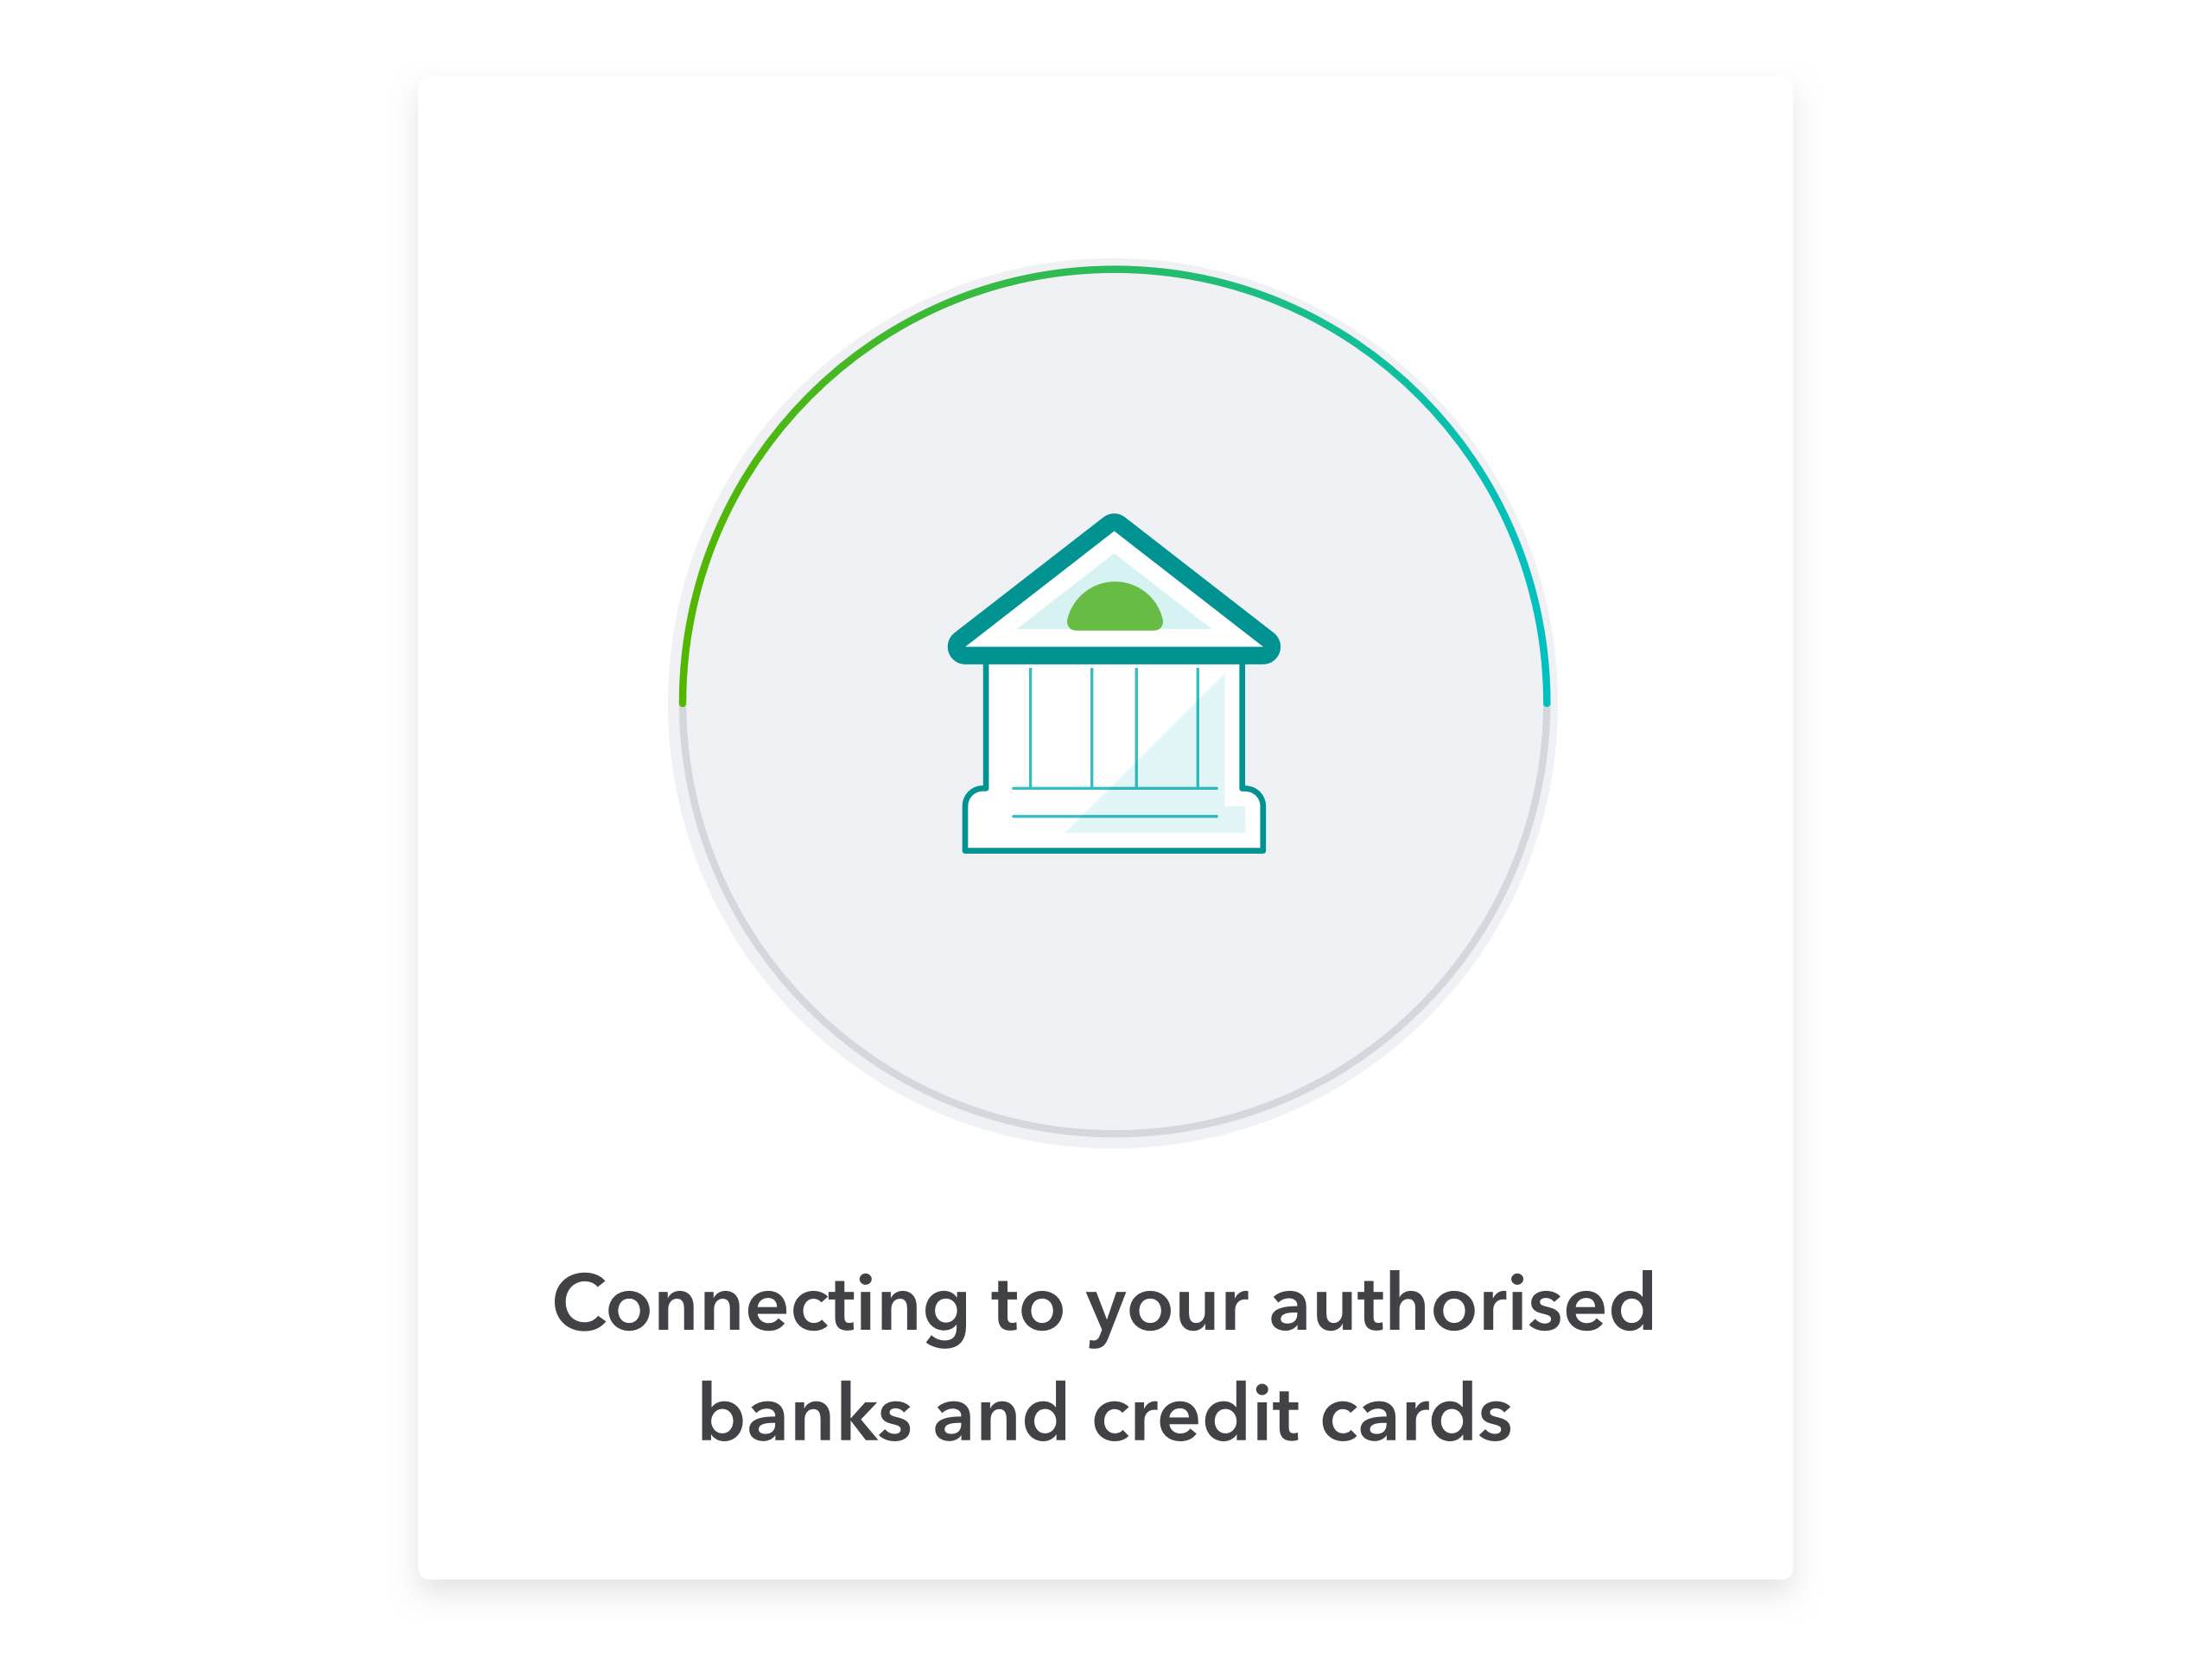 Illustration showing QuickBooks automating the connection to bank accounts